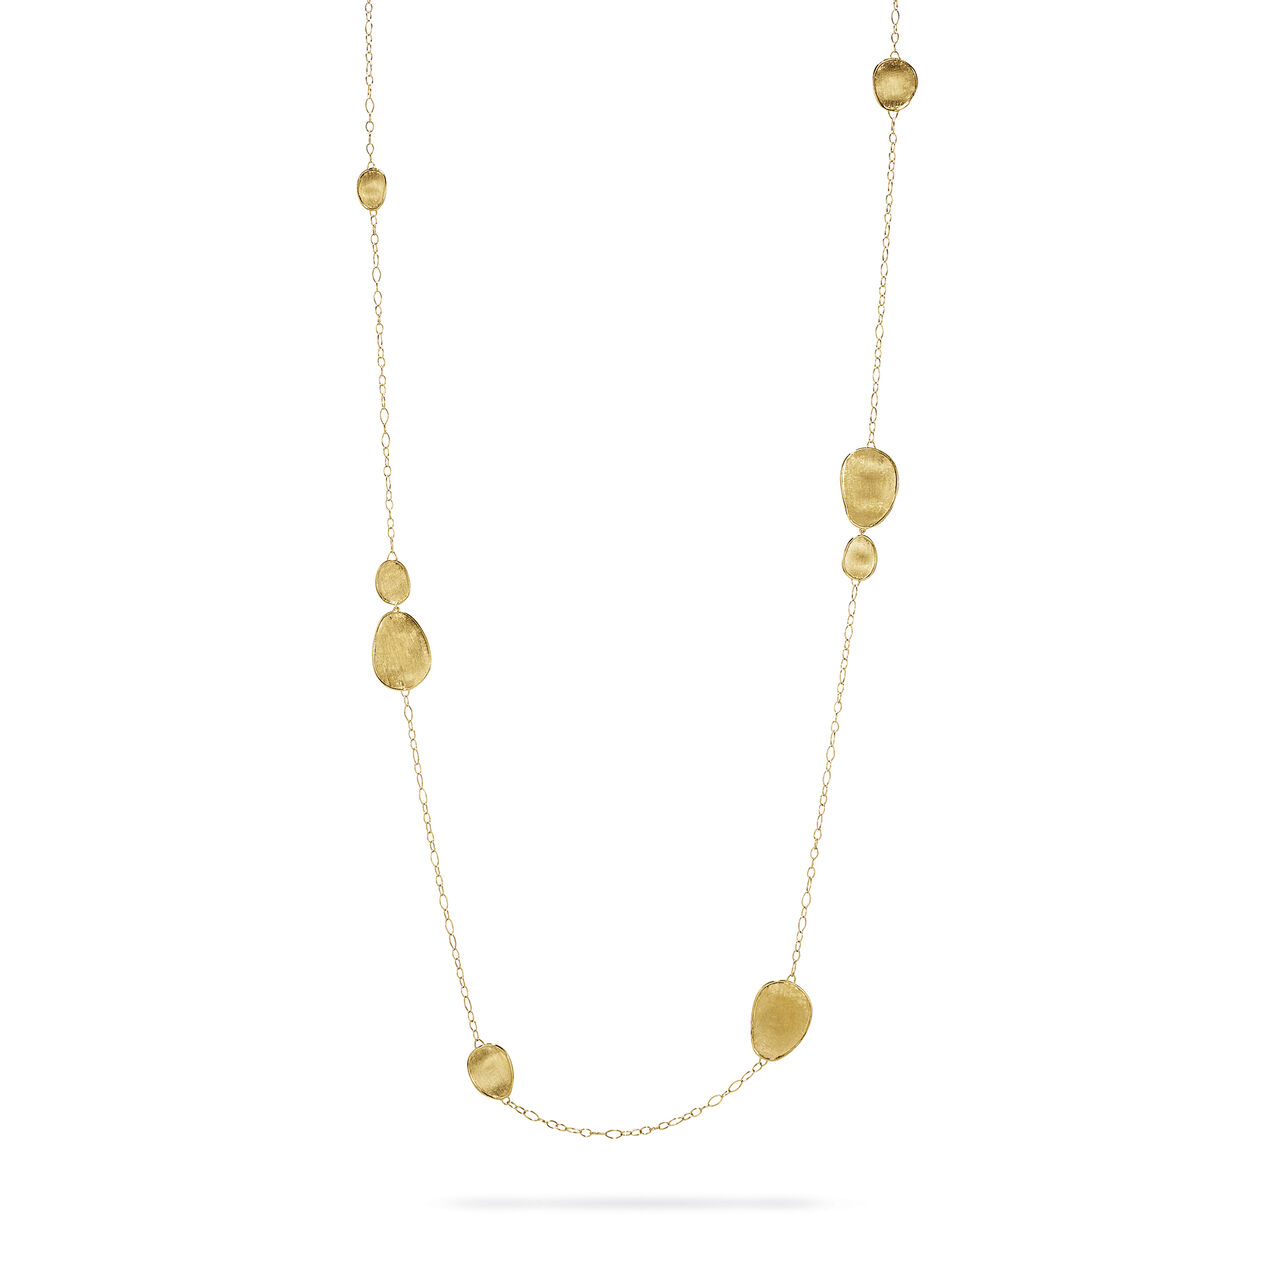 maison birks marco bicego lunaria yellow gold chain necklace cb1790 y 02 image number 0